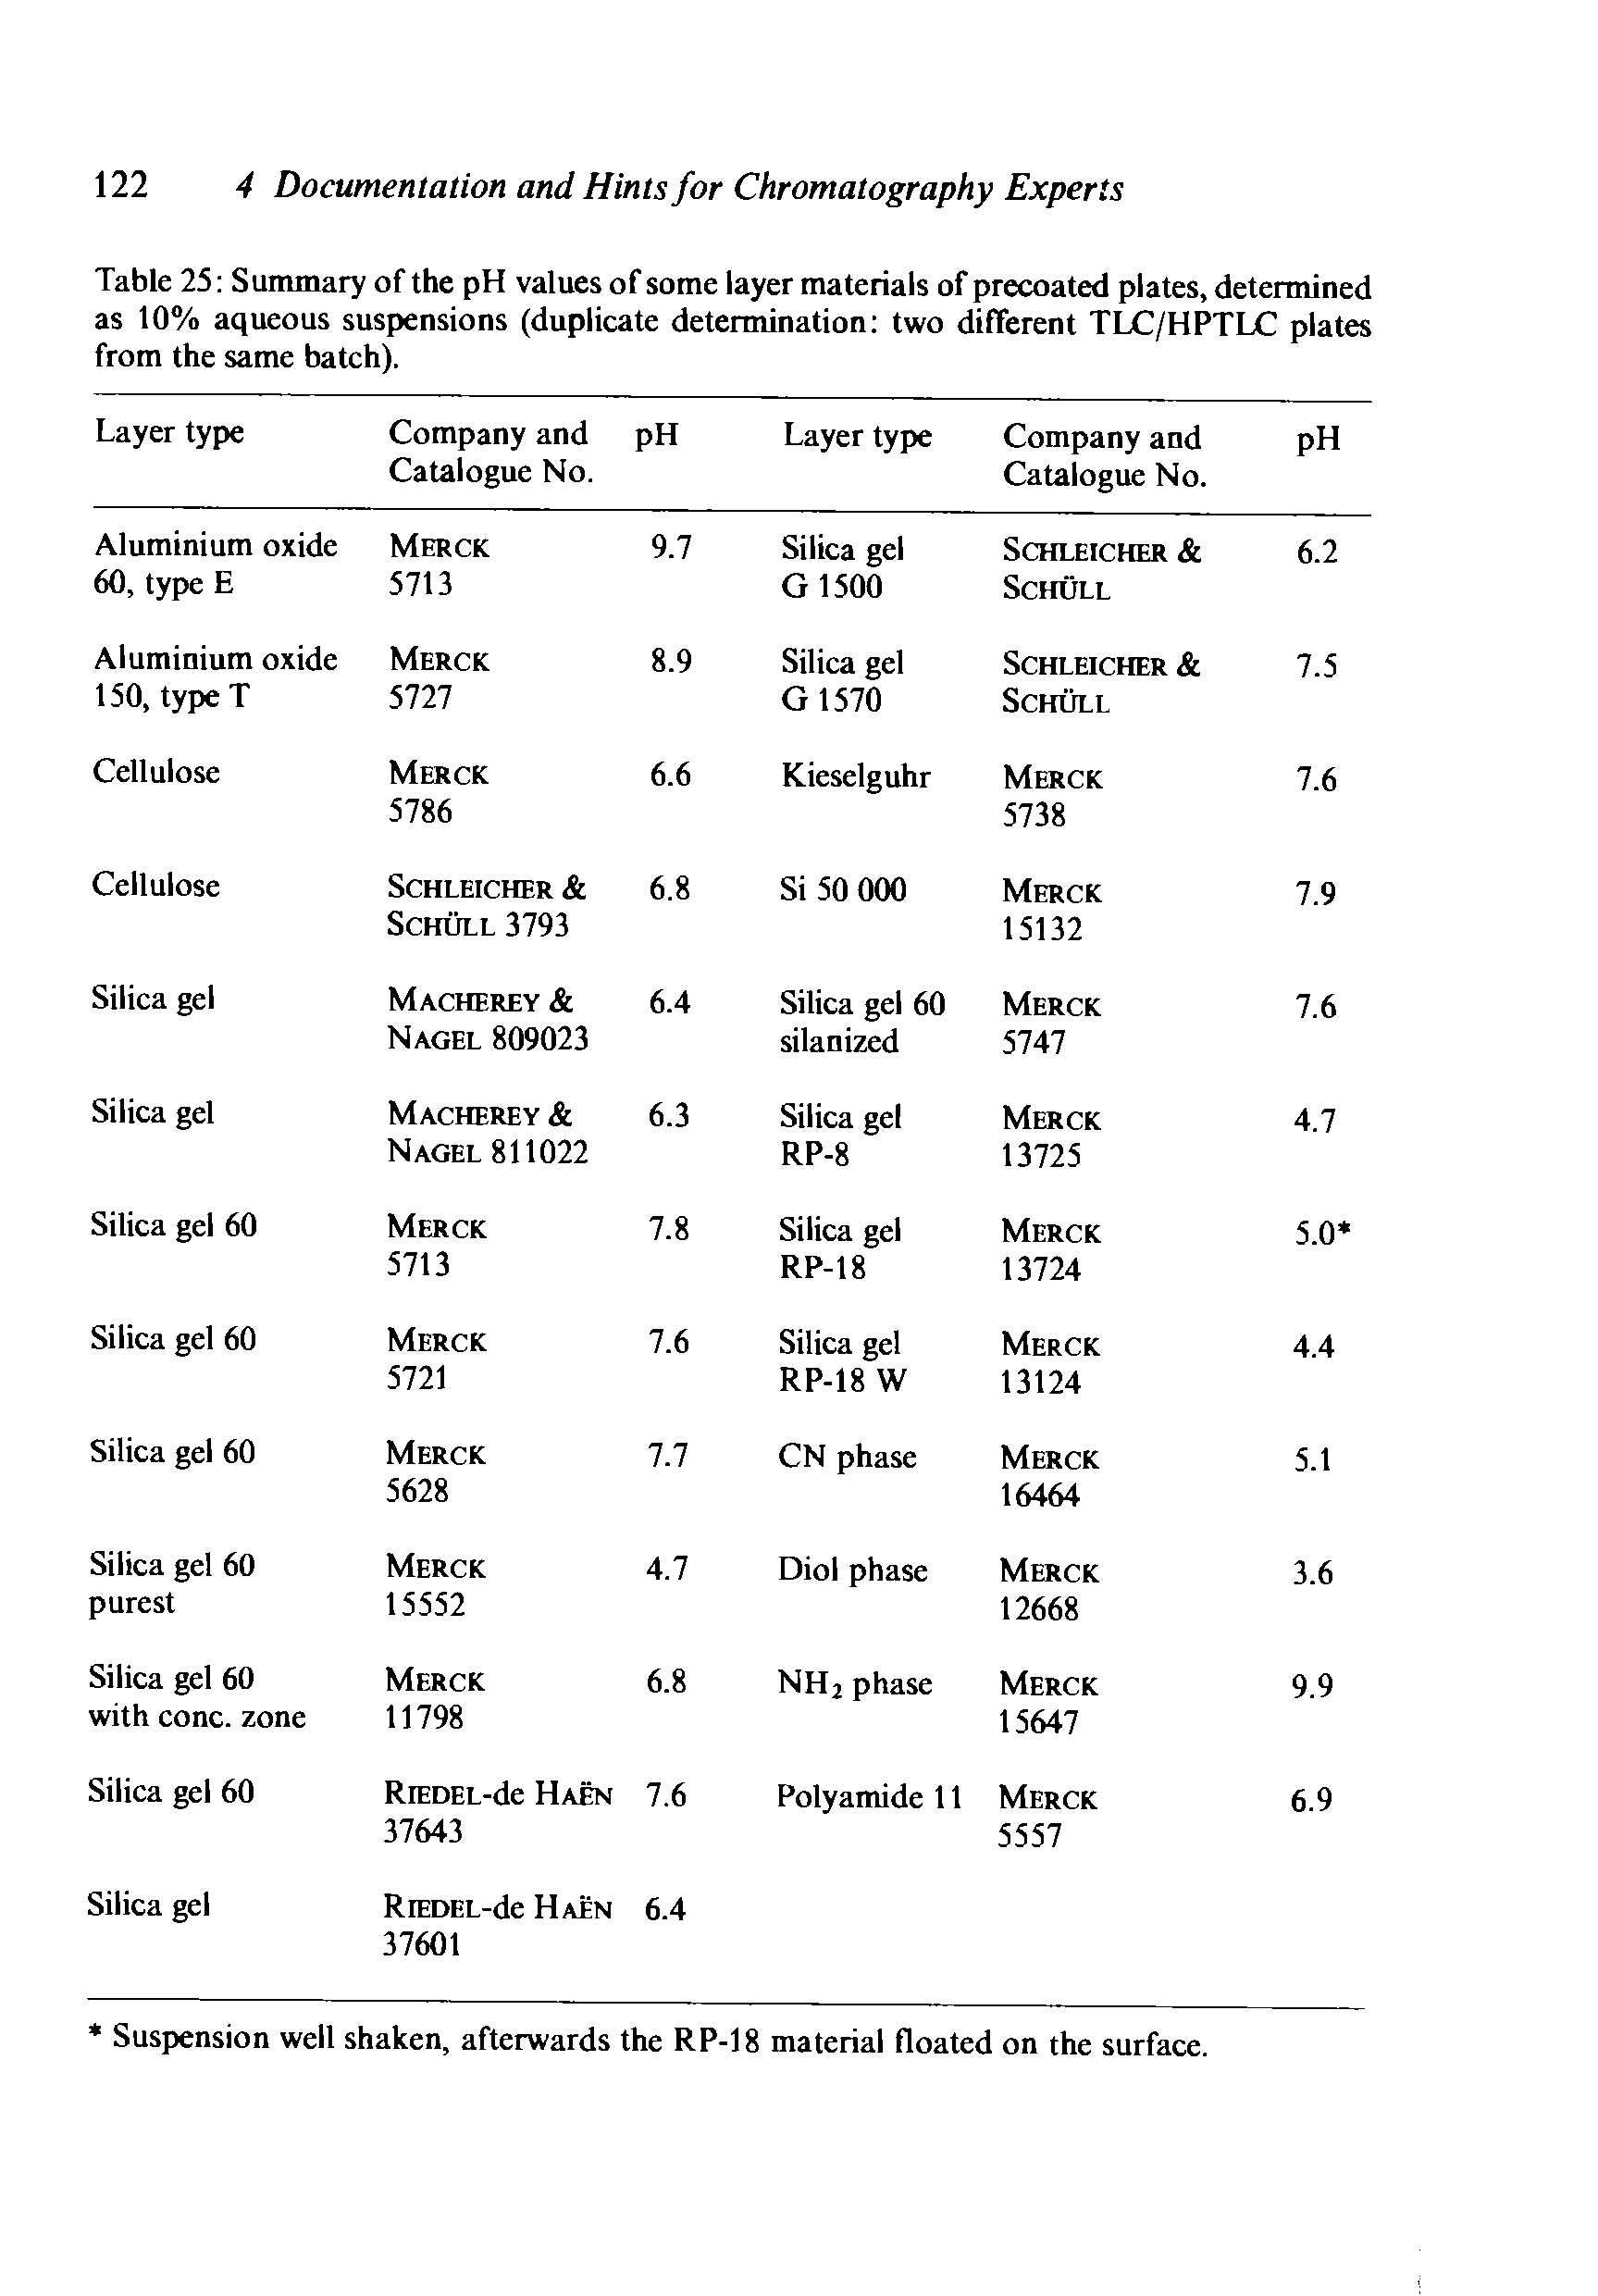 Table 25 Summary of the pH values of some layer materials of precoated plates, determined as 10% aqueous suspensions (duplicate determination two different TLC/HPTLC plates from the same bateh).